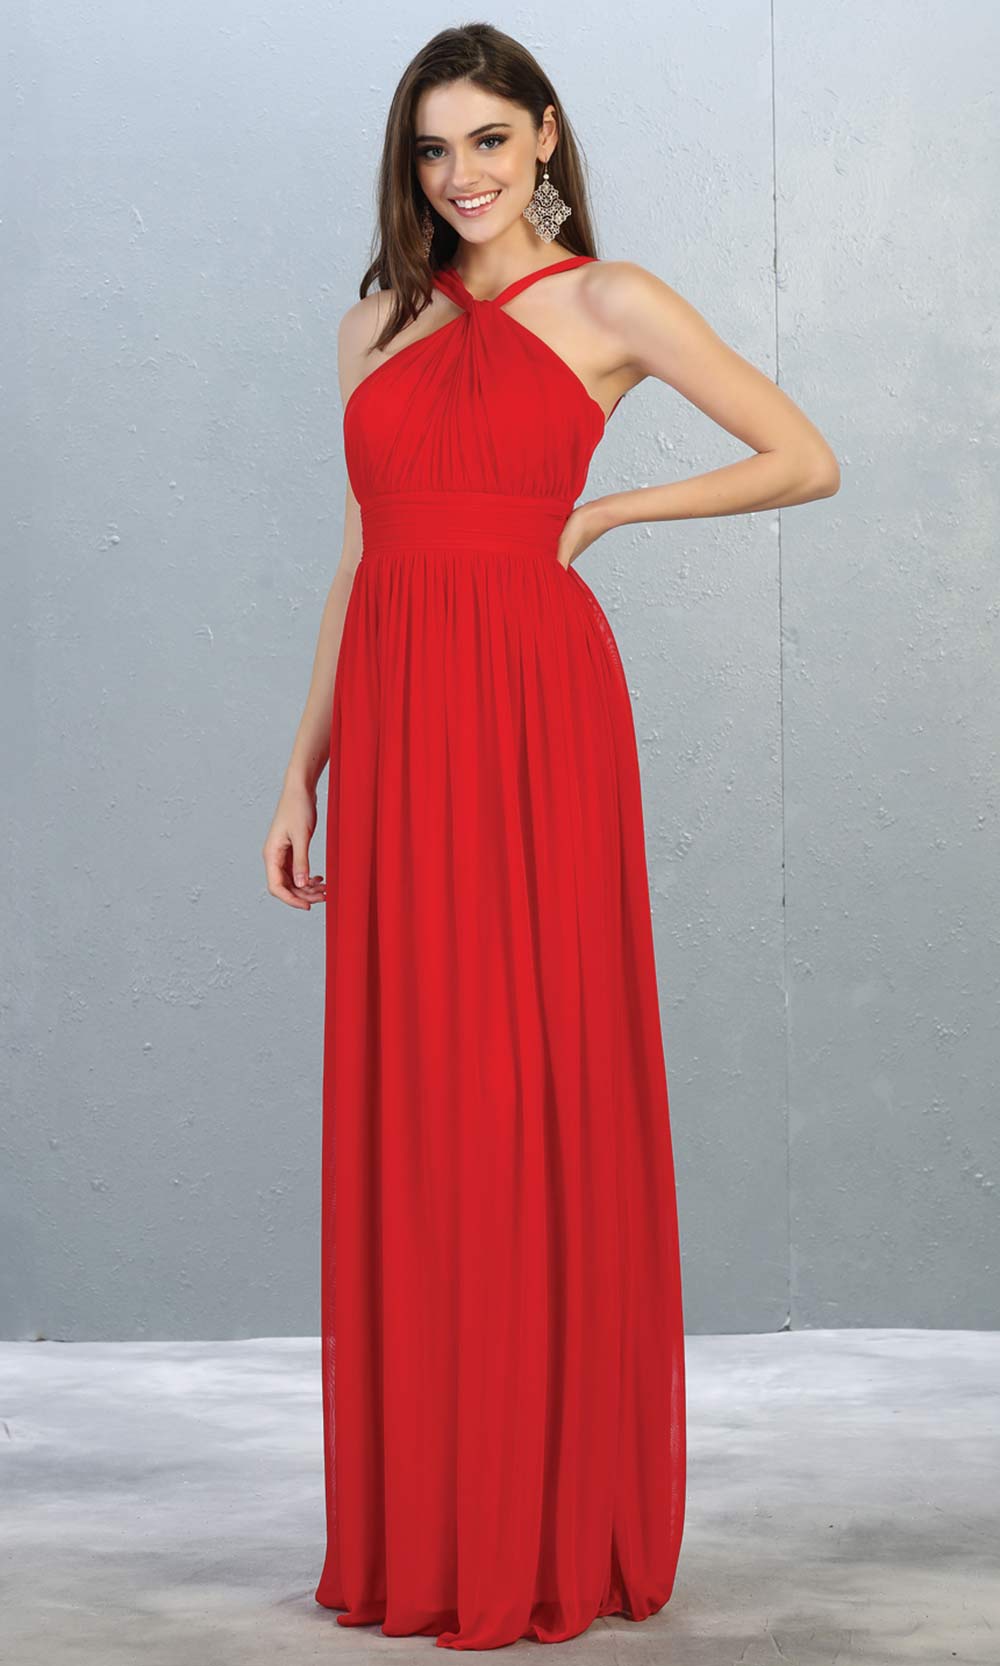 Mayqueen MQ1769 long red flowy dress with high neck. This simple red evening party dress is perfect for bridesmaids, wedding guest dress, simple prom dress. Plus sizes available.jpg